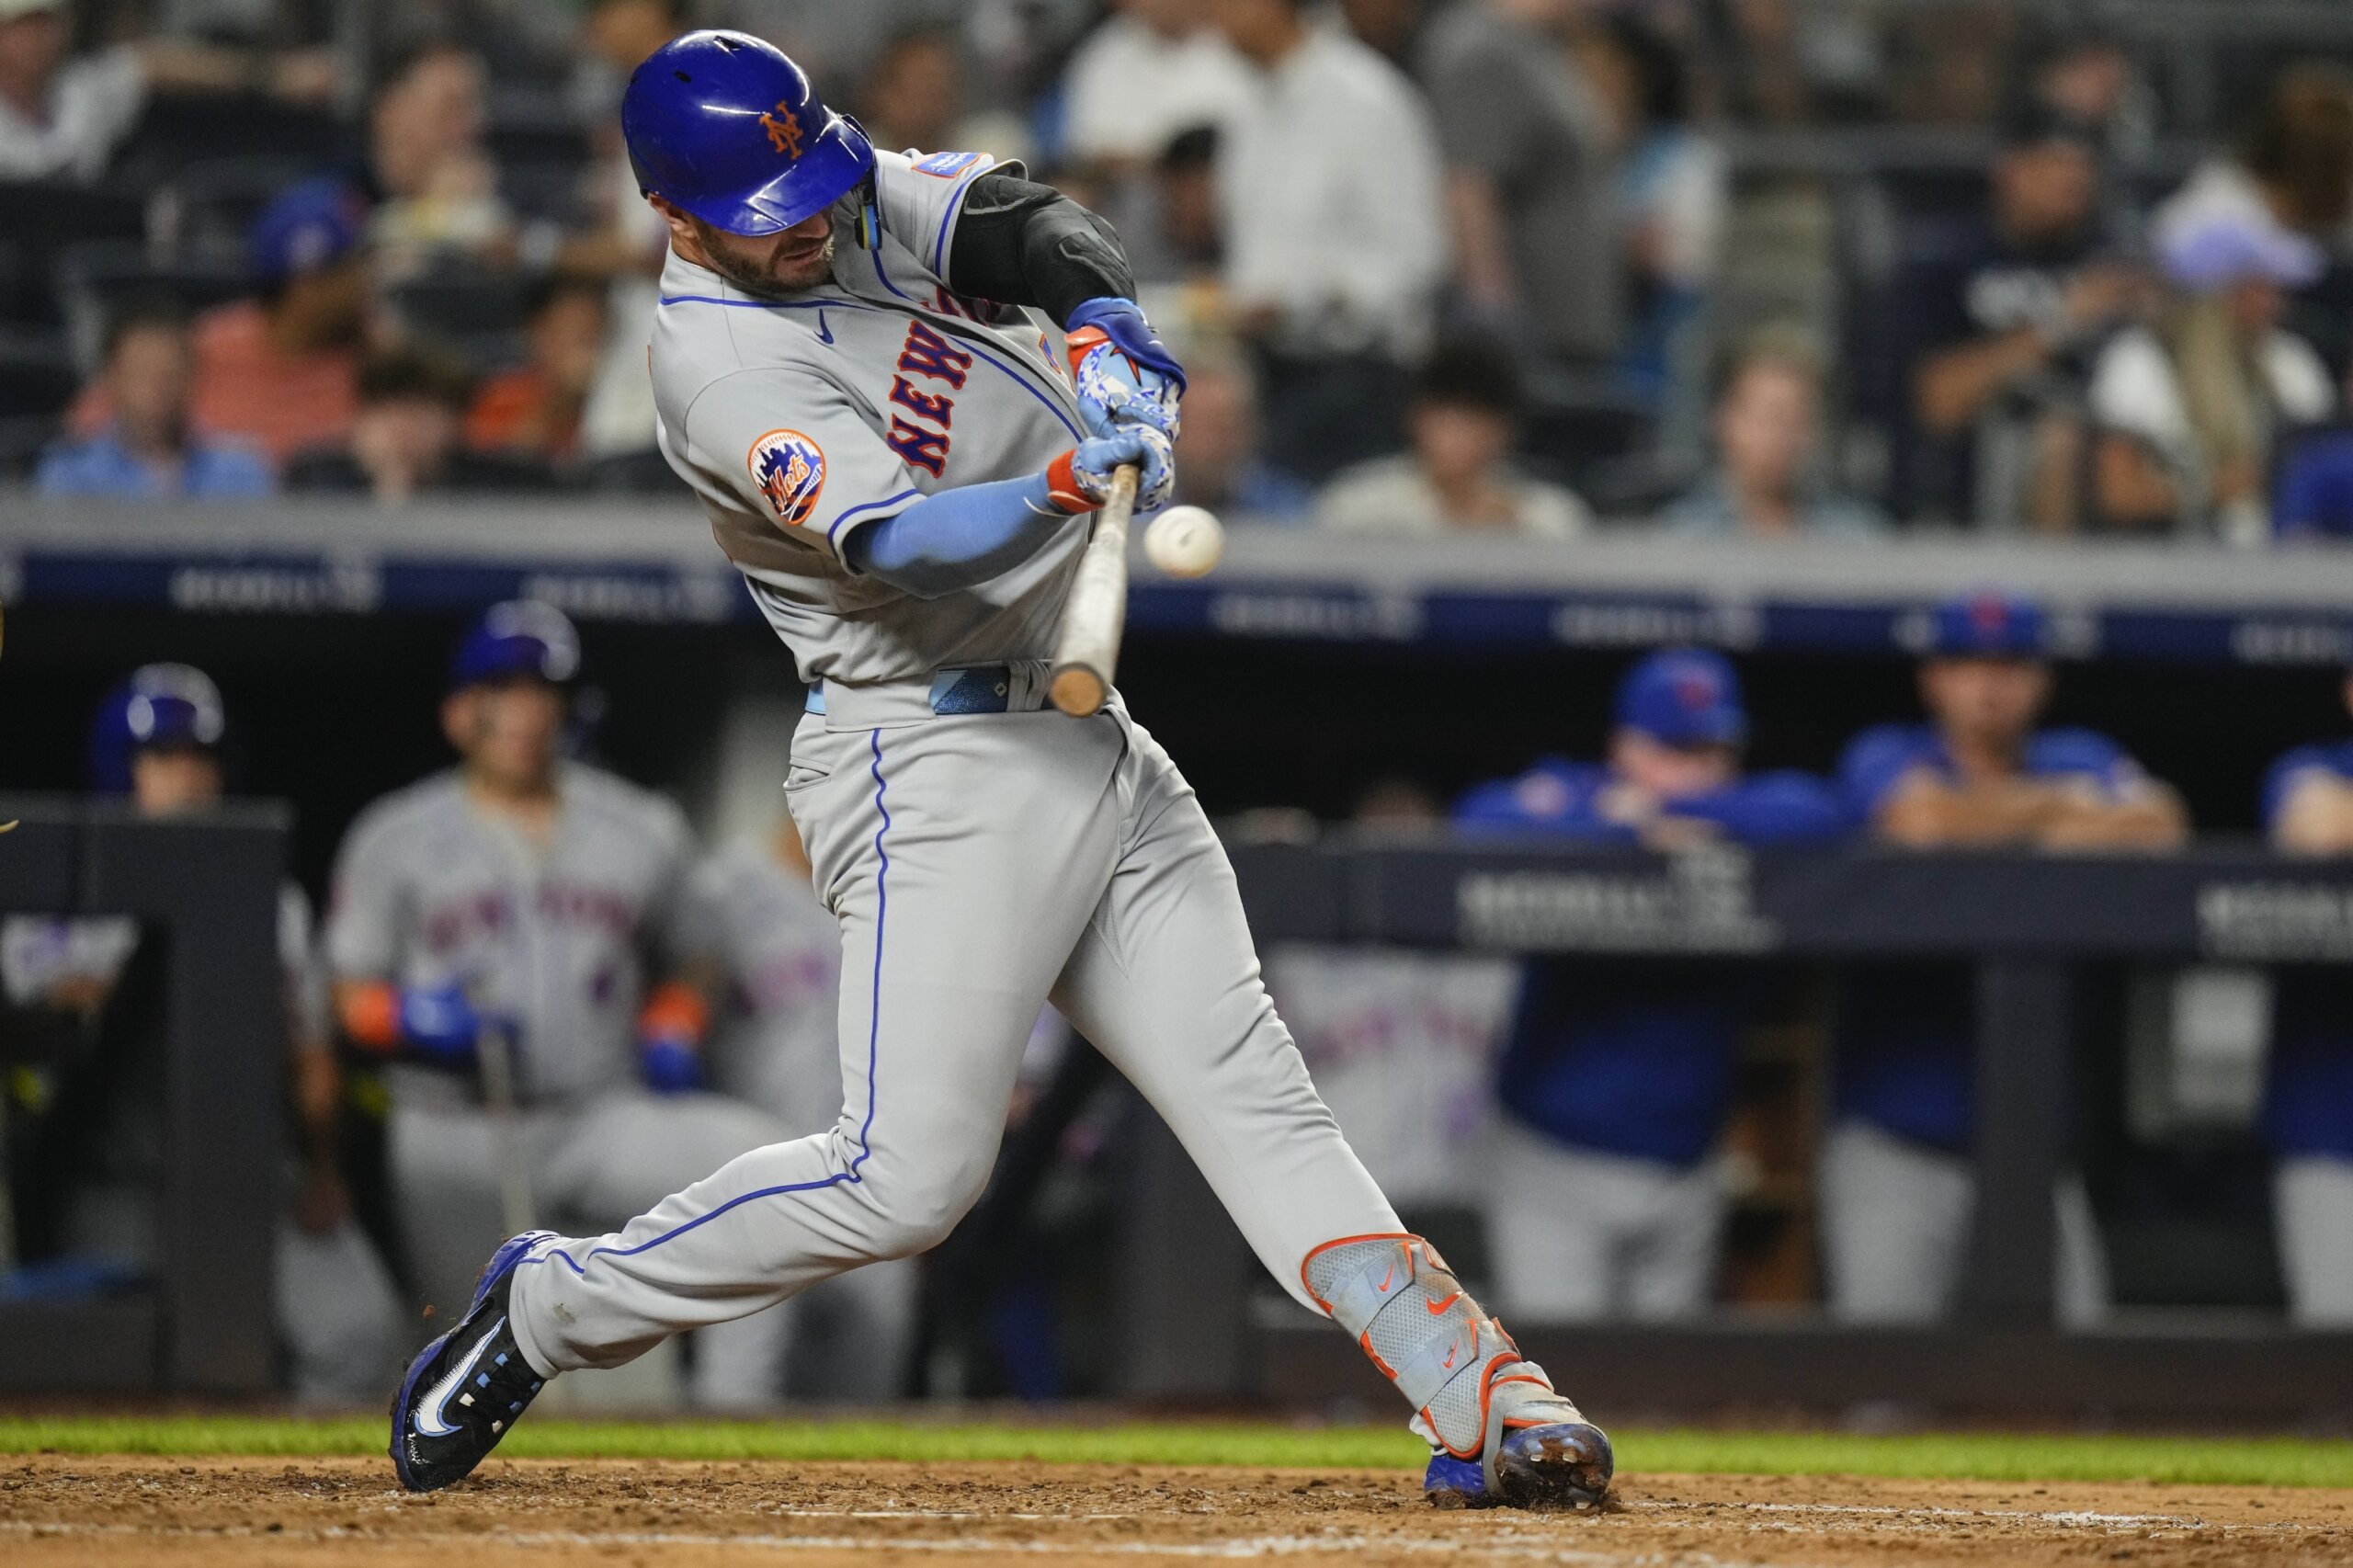 The New York Mets need Subway Series far more than Yankees right now